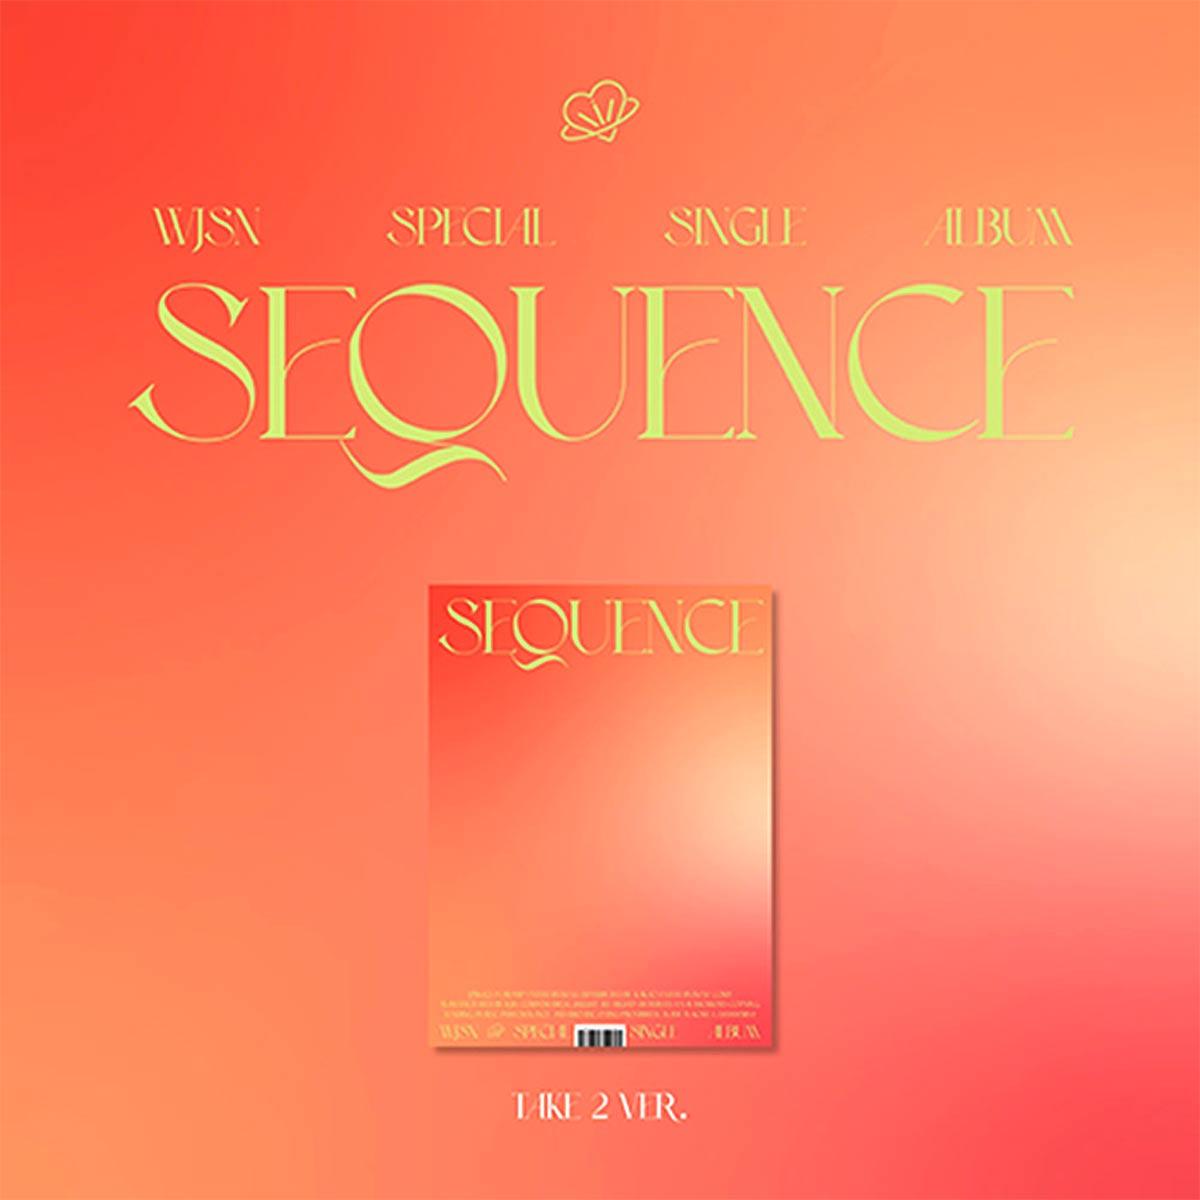 WJSN - Special Single Album [SEQUENCE]